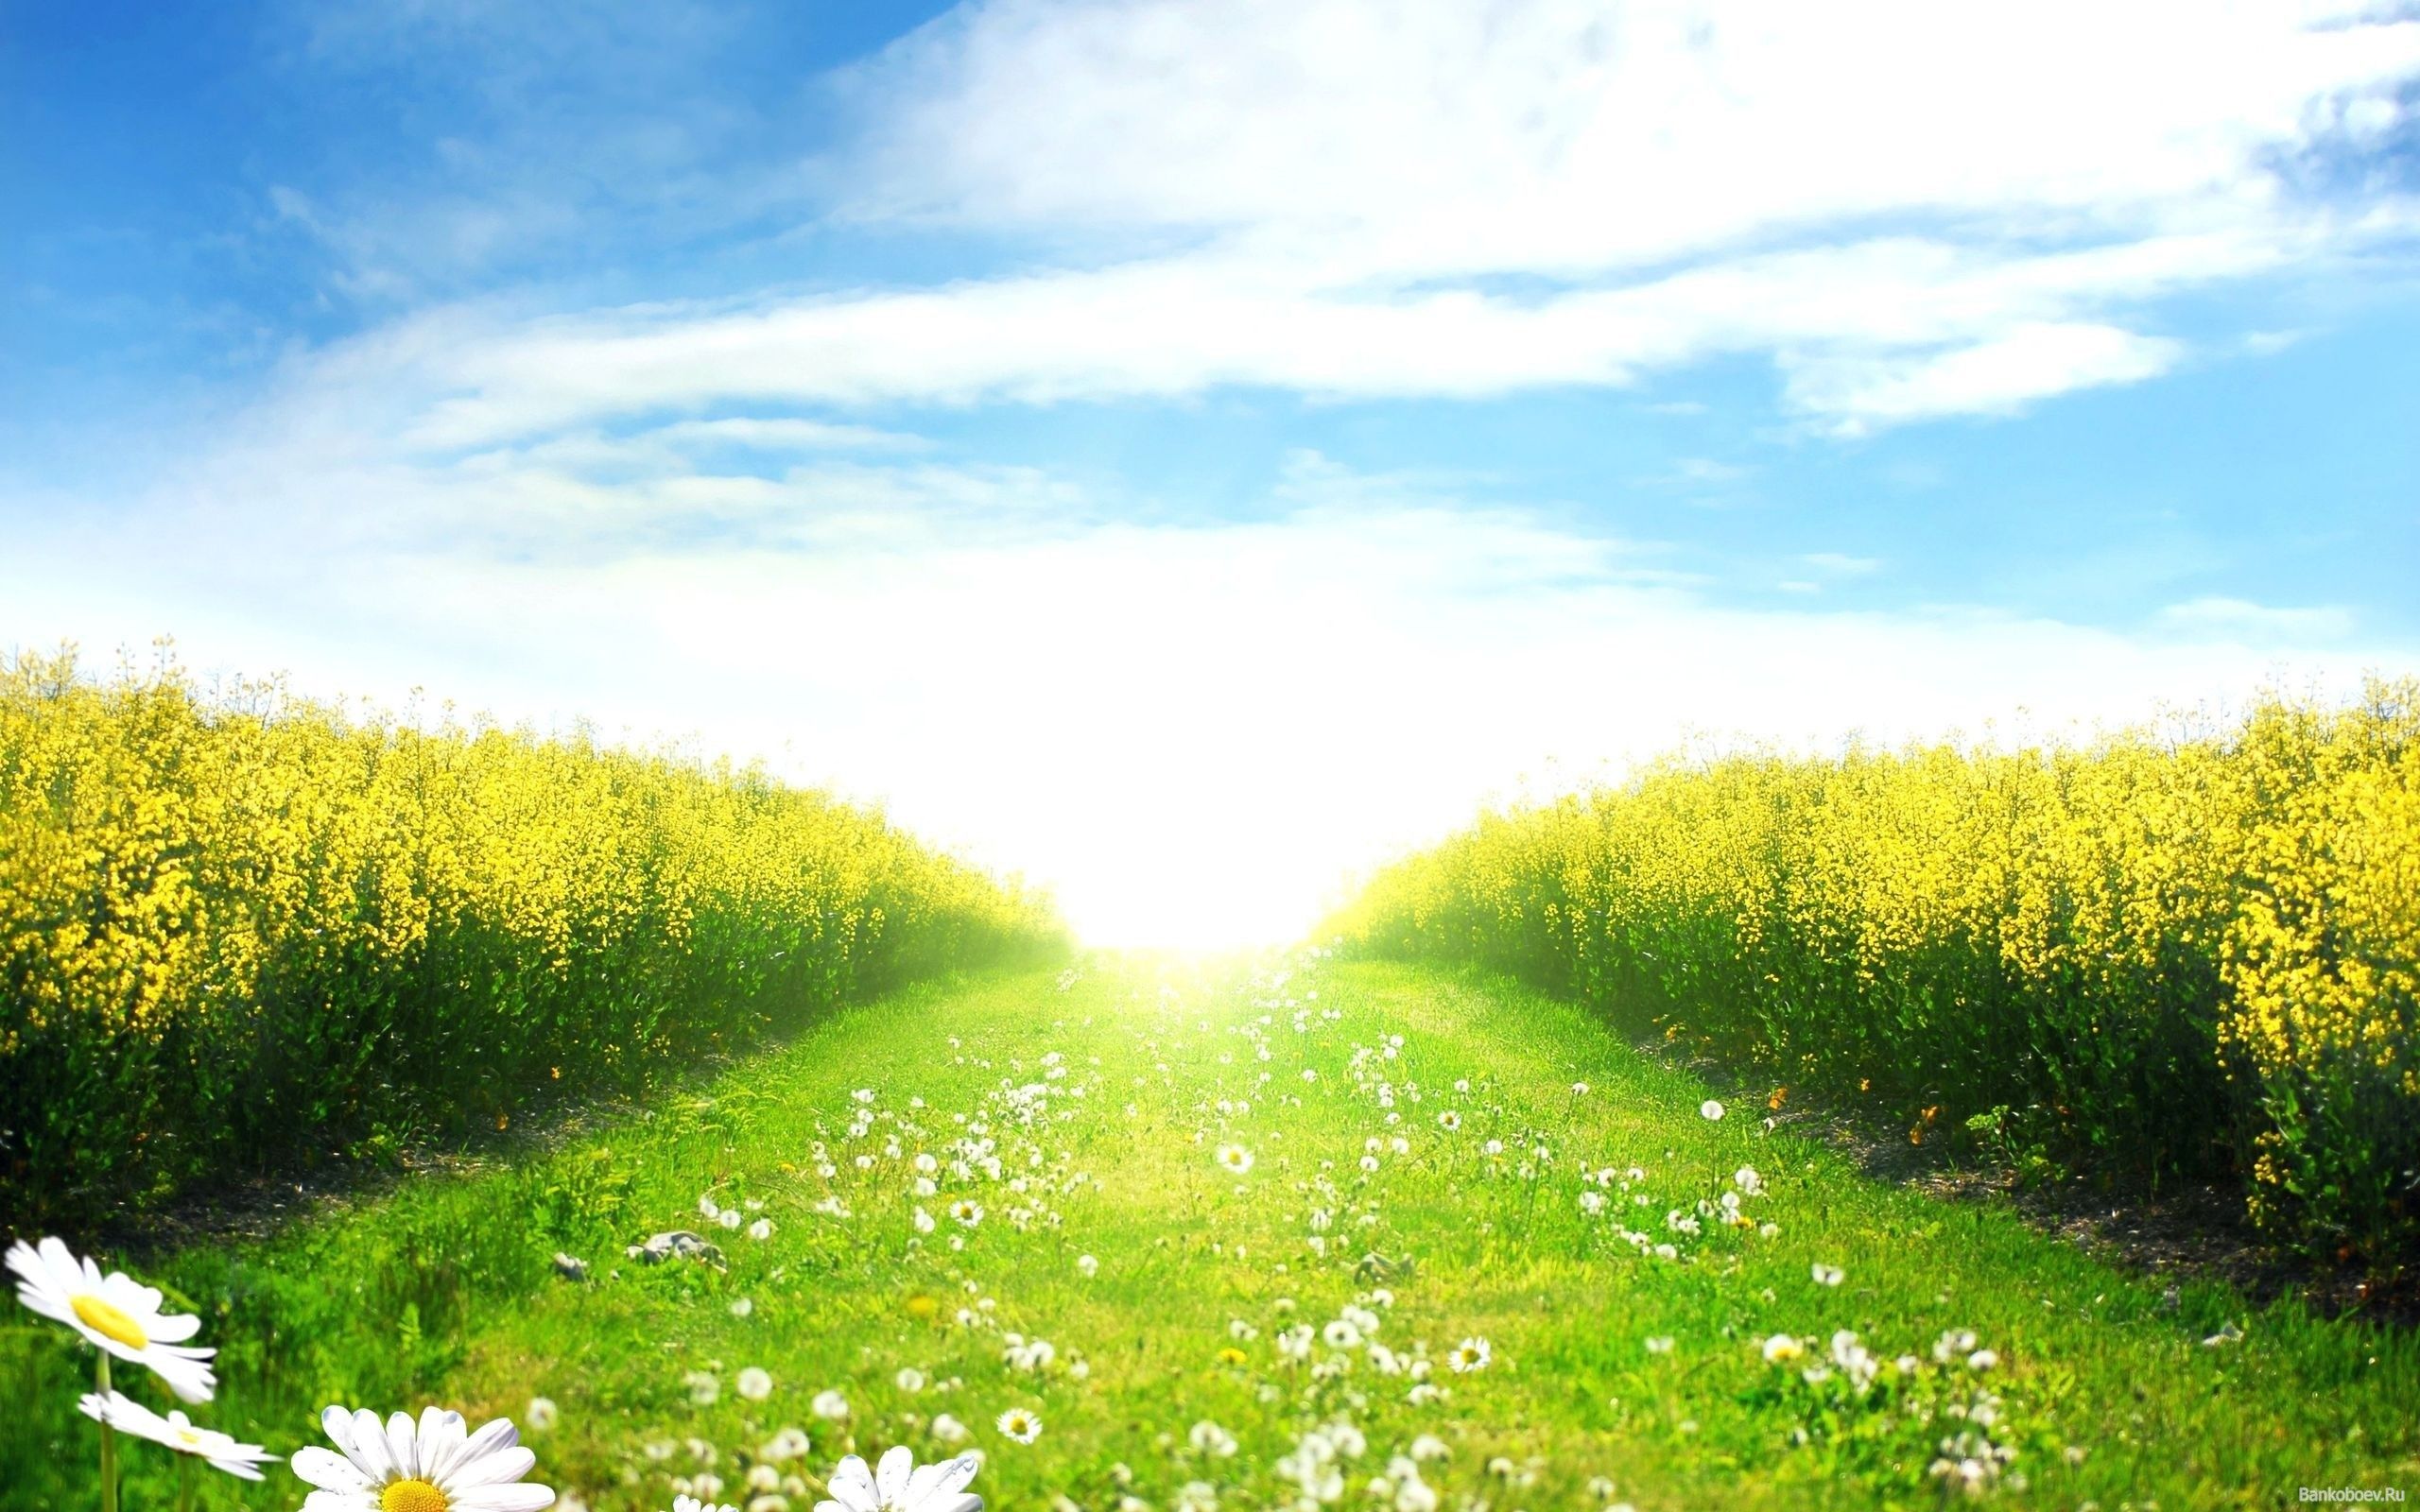 Sunny day in the spring field wallpapers and images - wallpapers ...